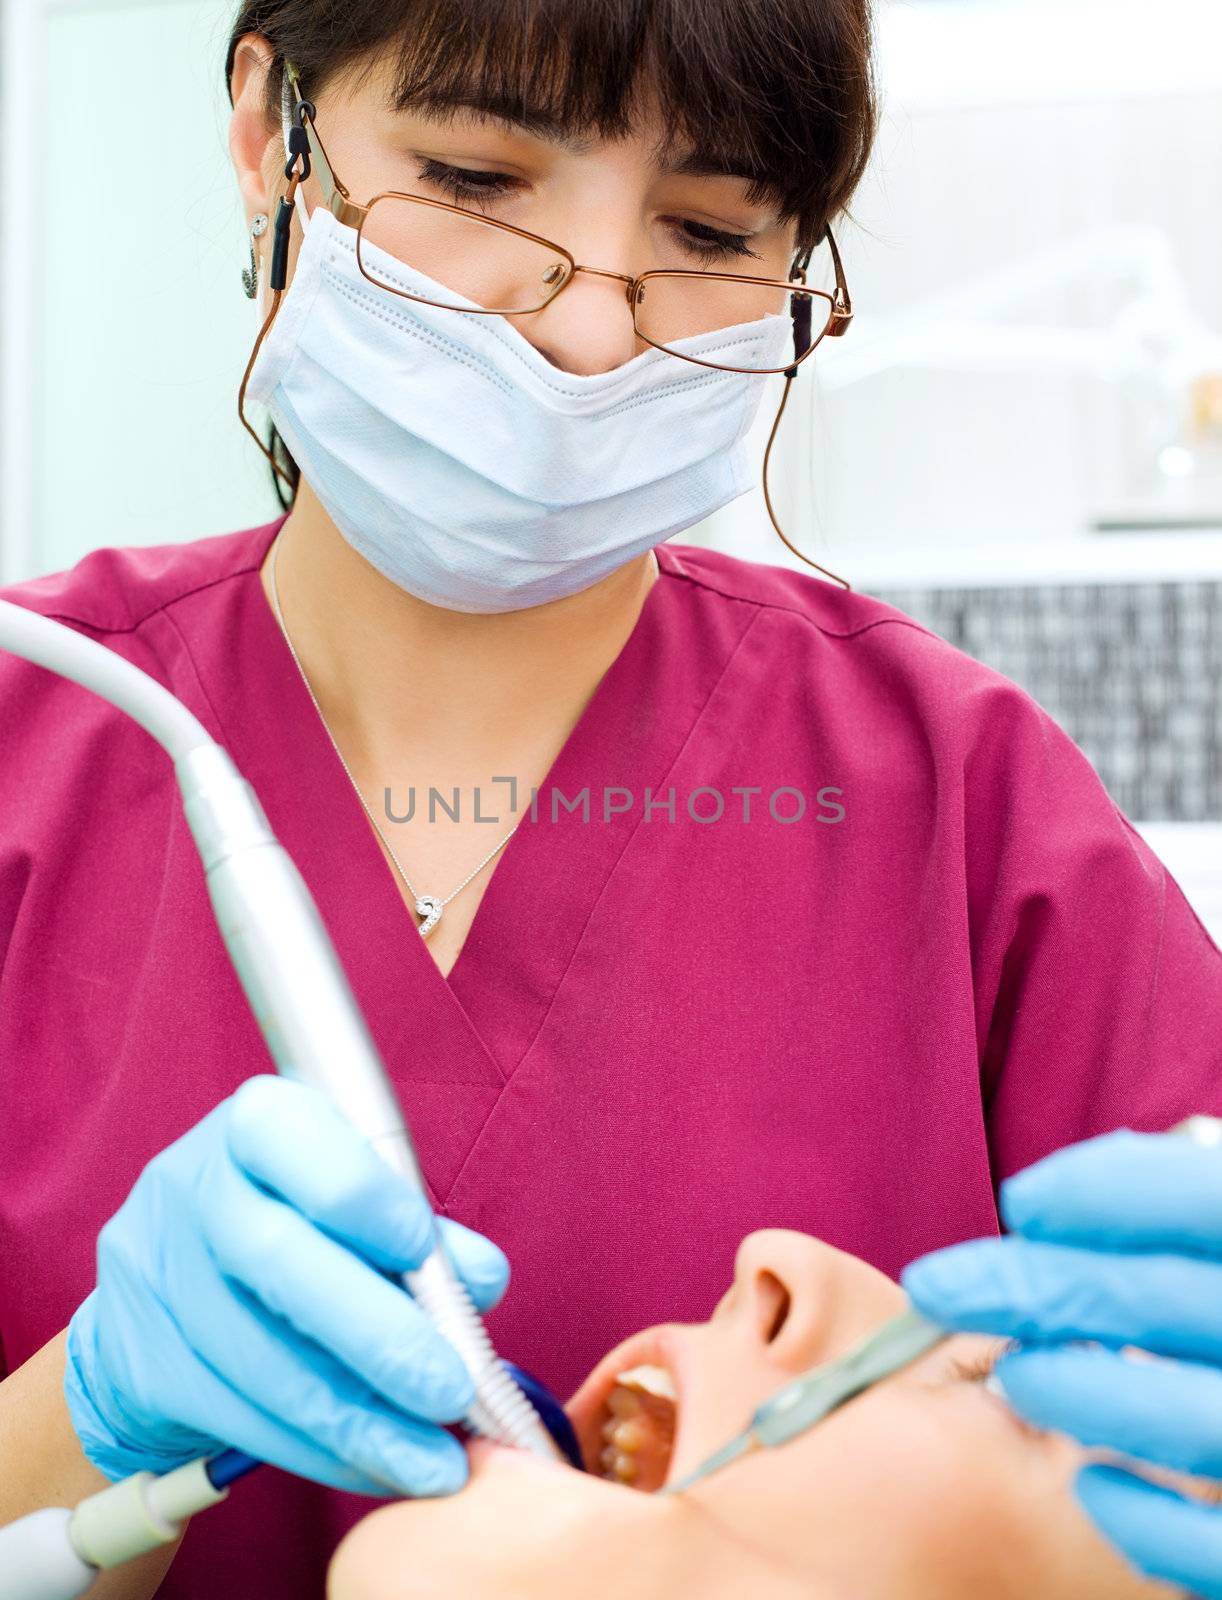 Female dentist wearing protective mask and gloves working on patient